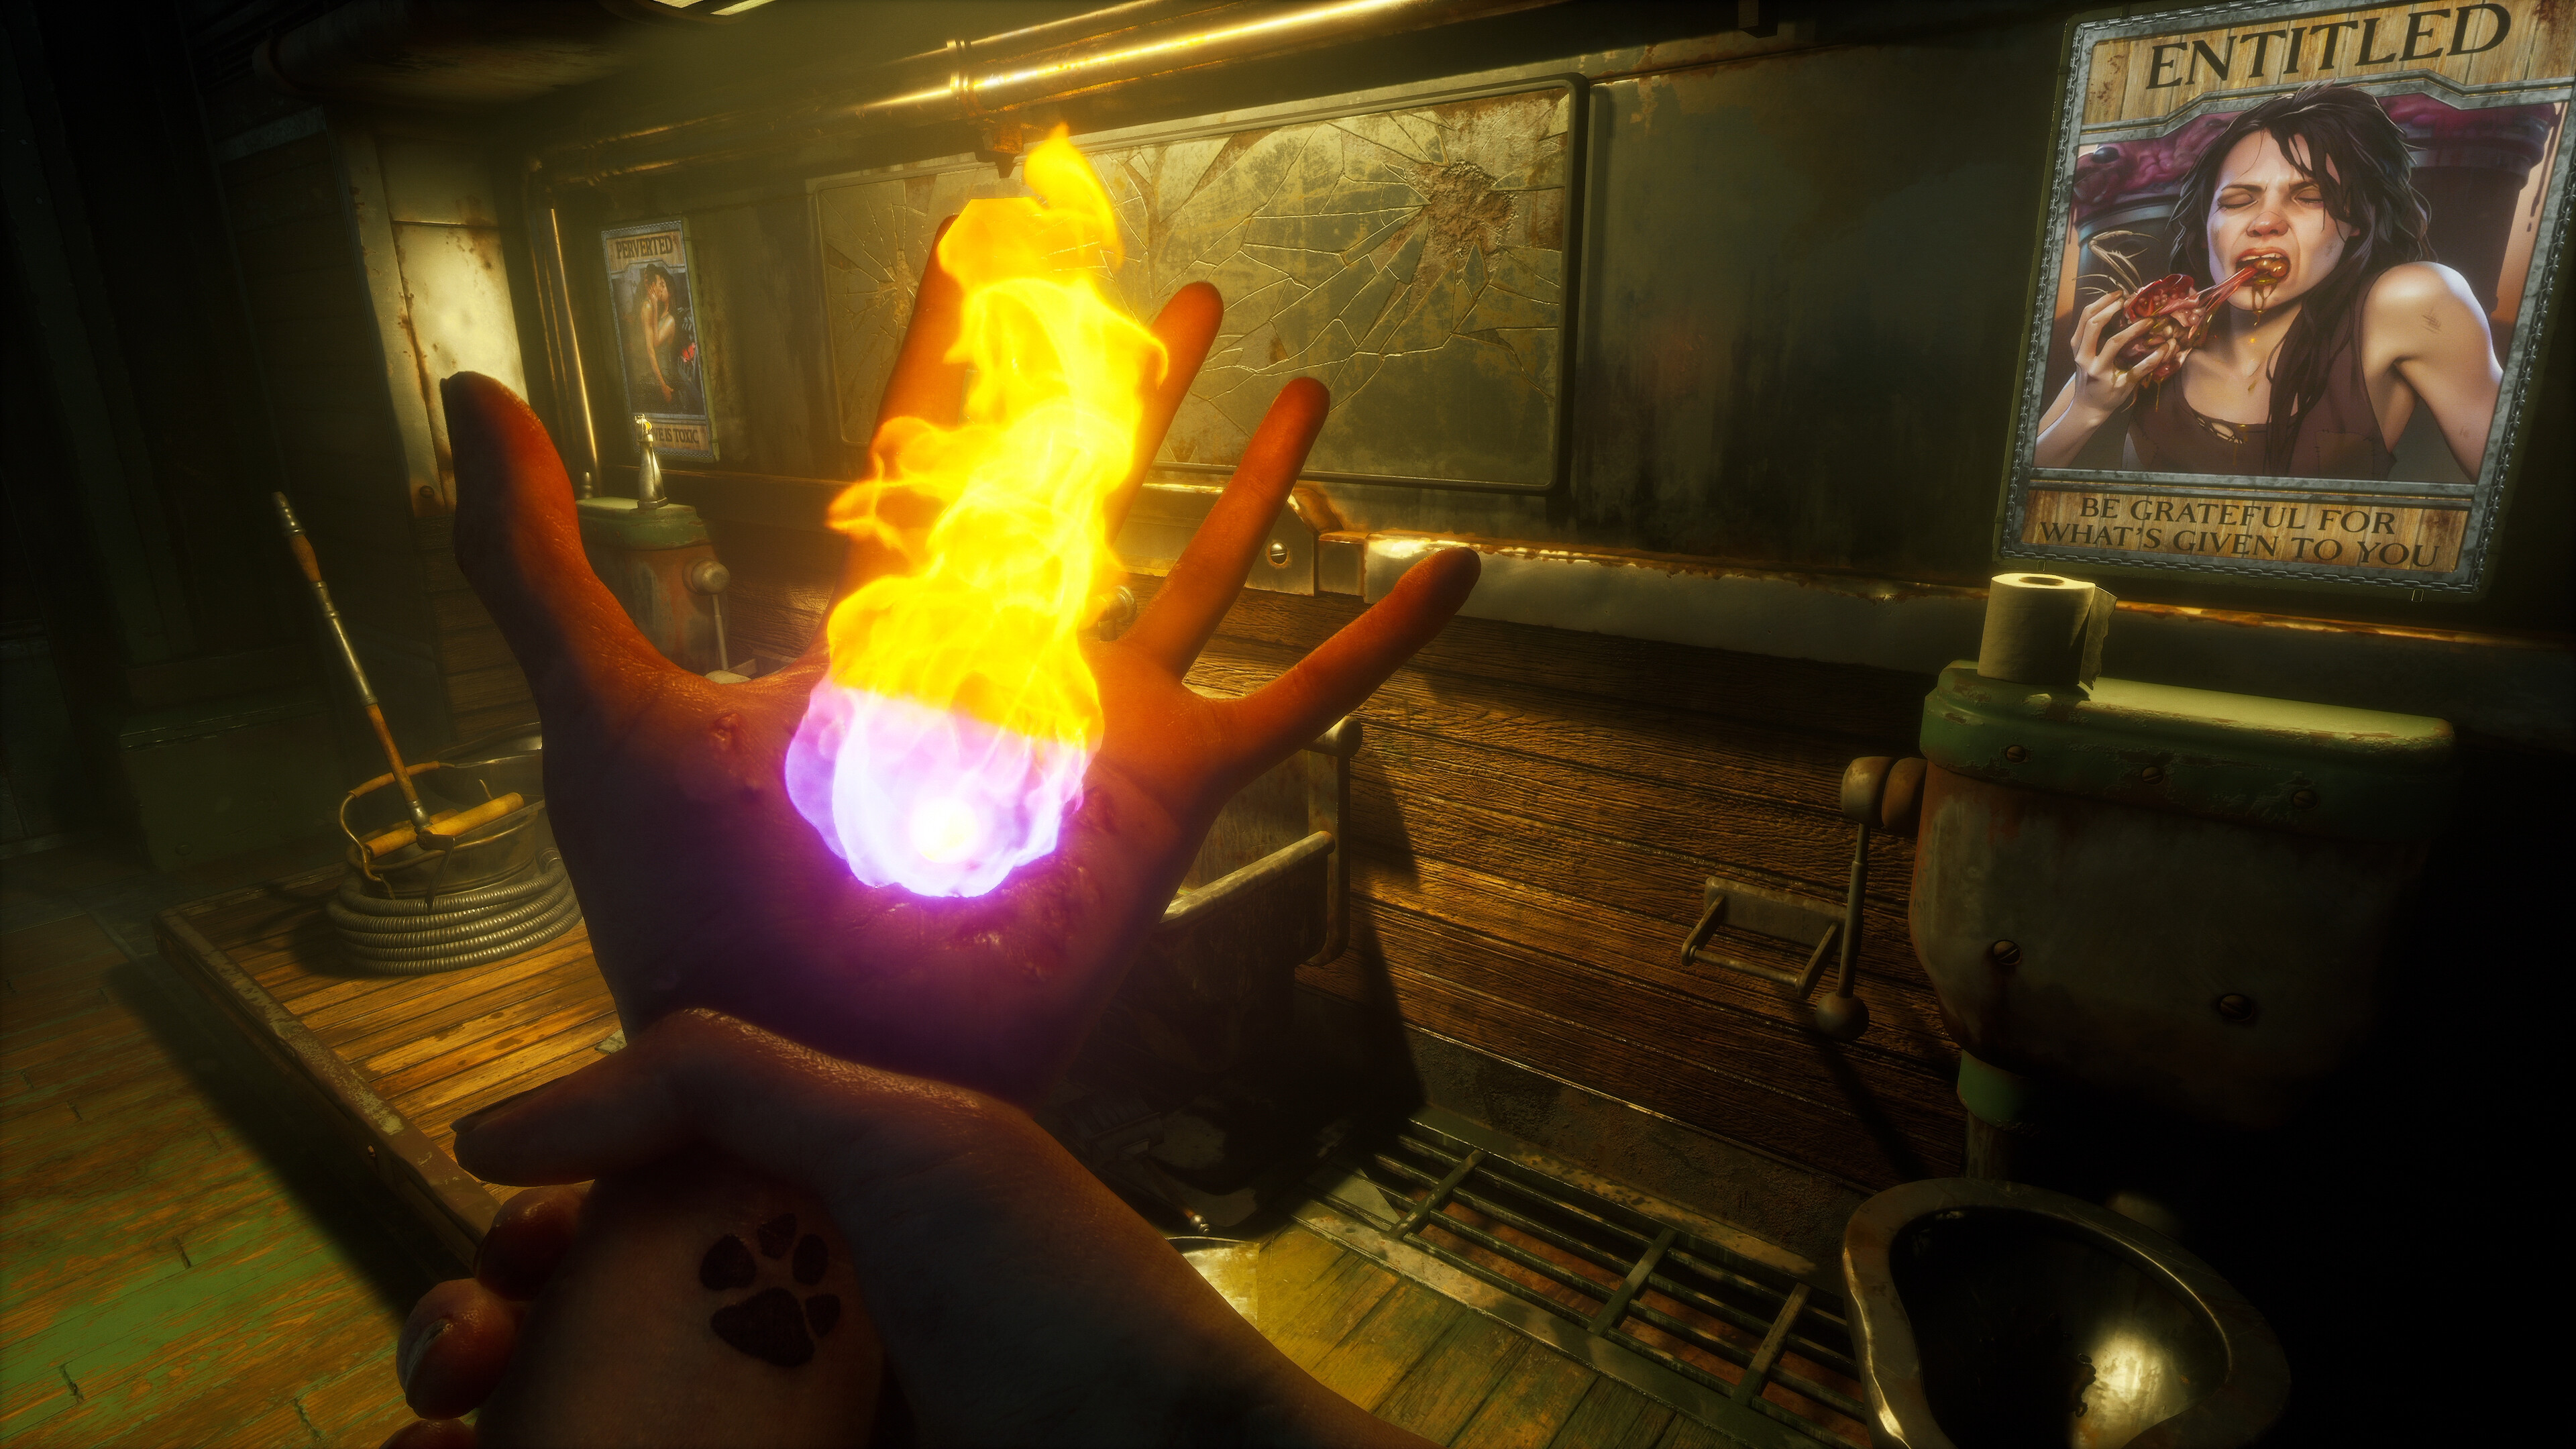 BioShock Creator Ken Levine's New Game, Judas, Planned For Release By